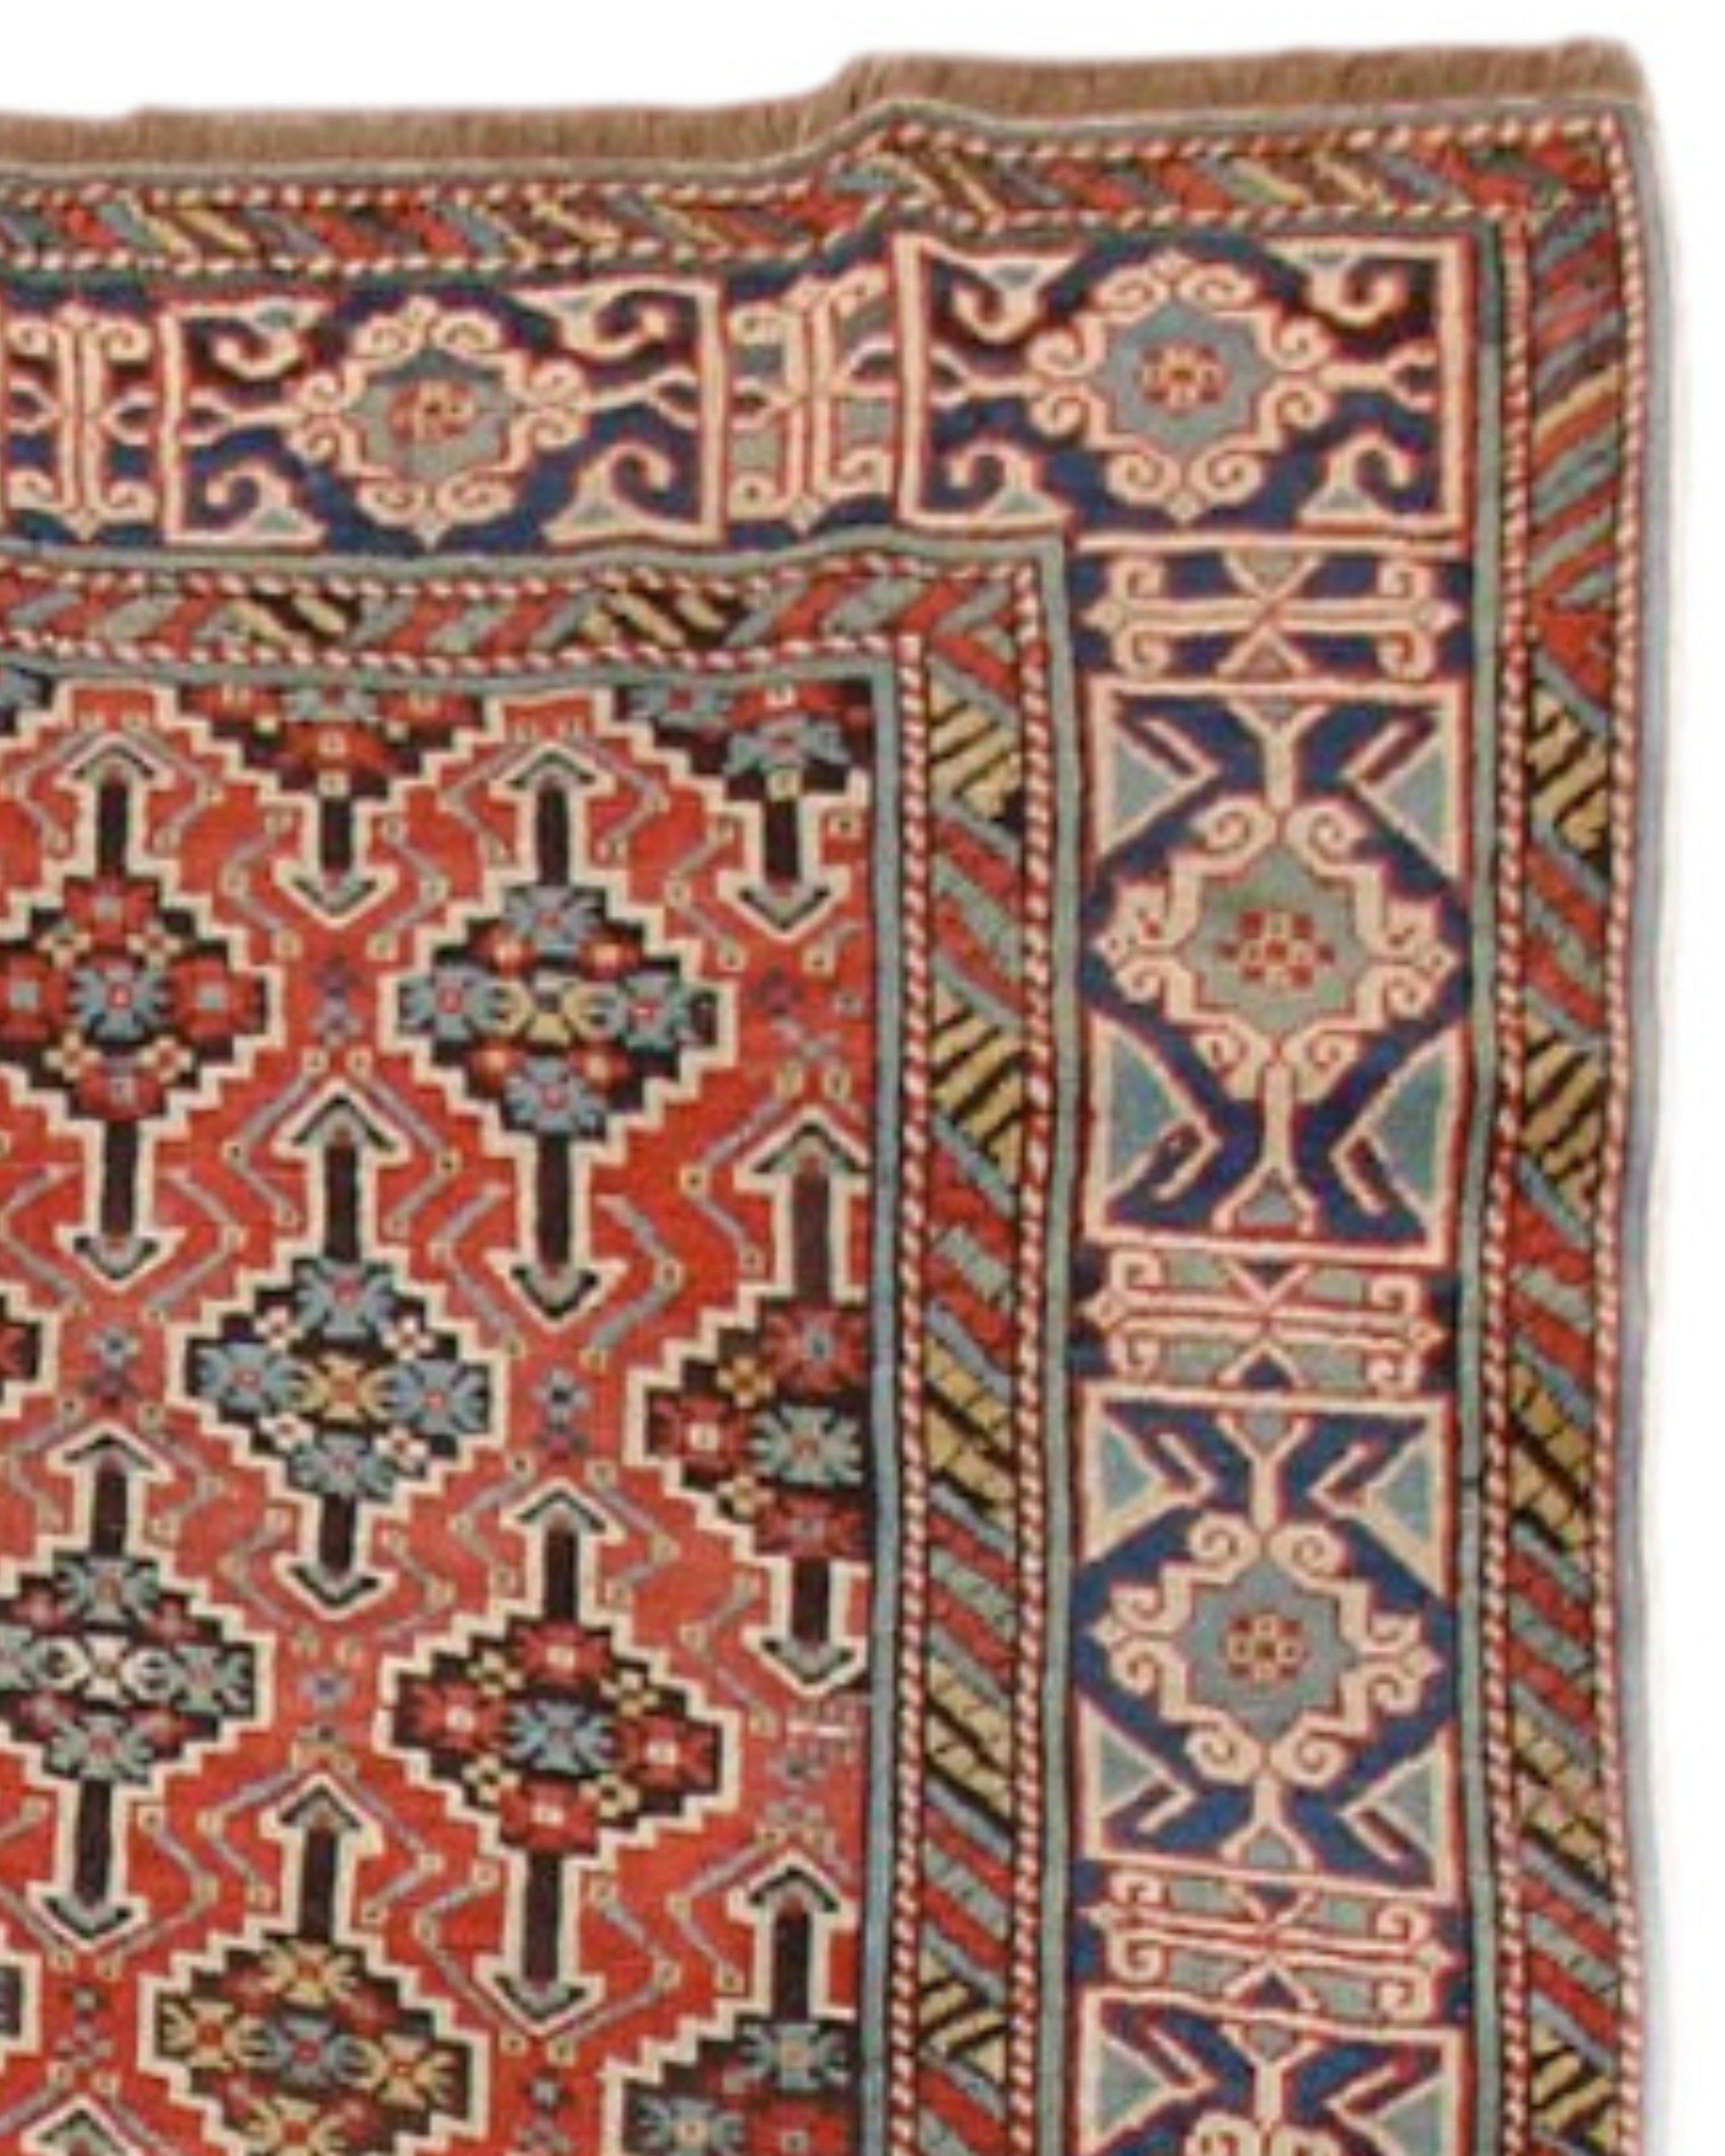 Antique Kuba Rug, 19th Century

Kuba rugs are named after the city of Kuba, which is now known as Quba and is located in the northeastern part of the Caucasus region. When they were first produced, Kuba rugs were considered the best rugs of the